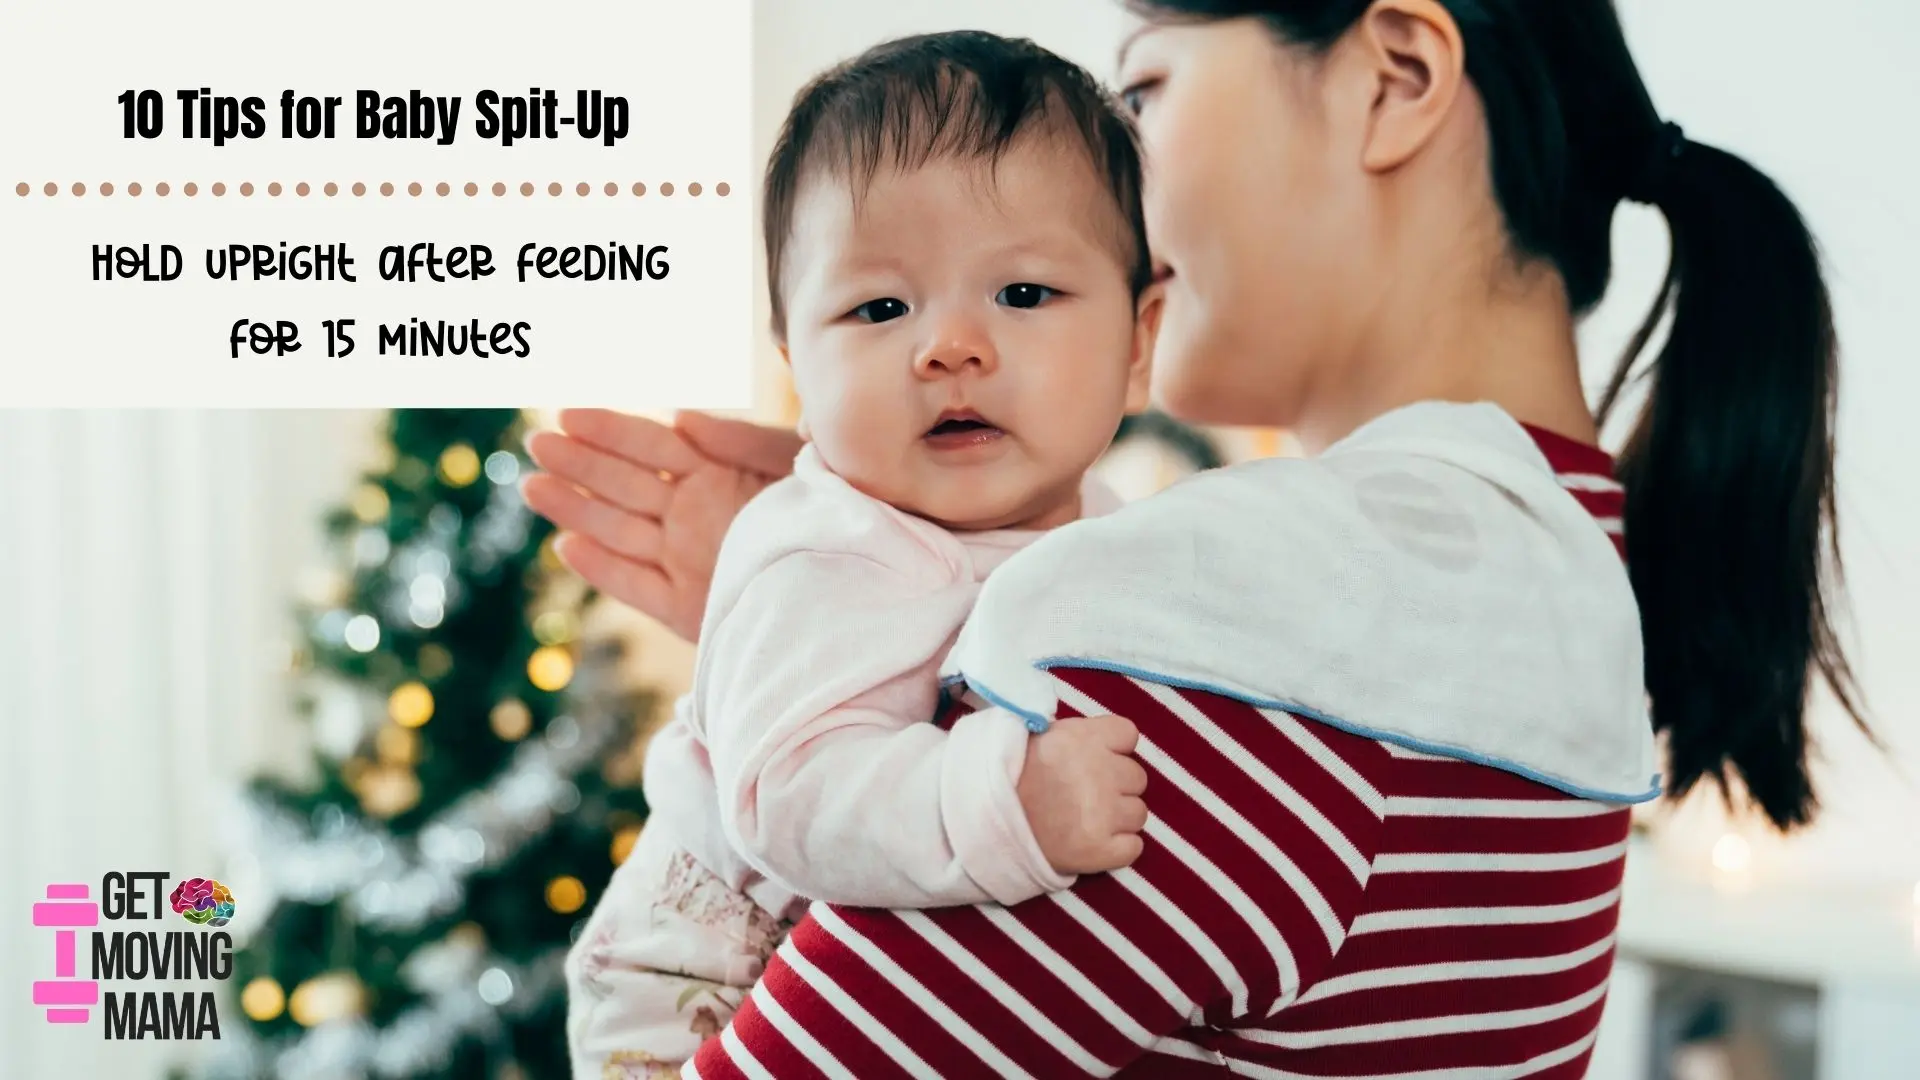 A picture of a mom burping a baby on her shoulder with a Christmas tree in the background.